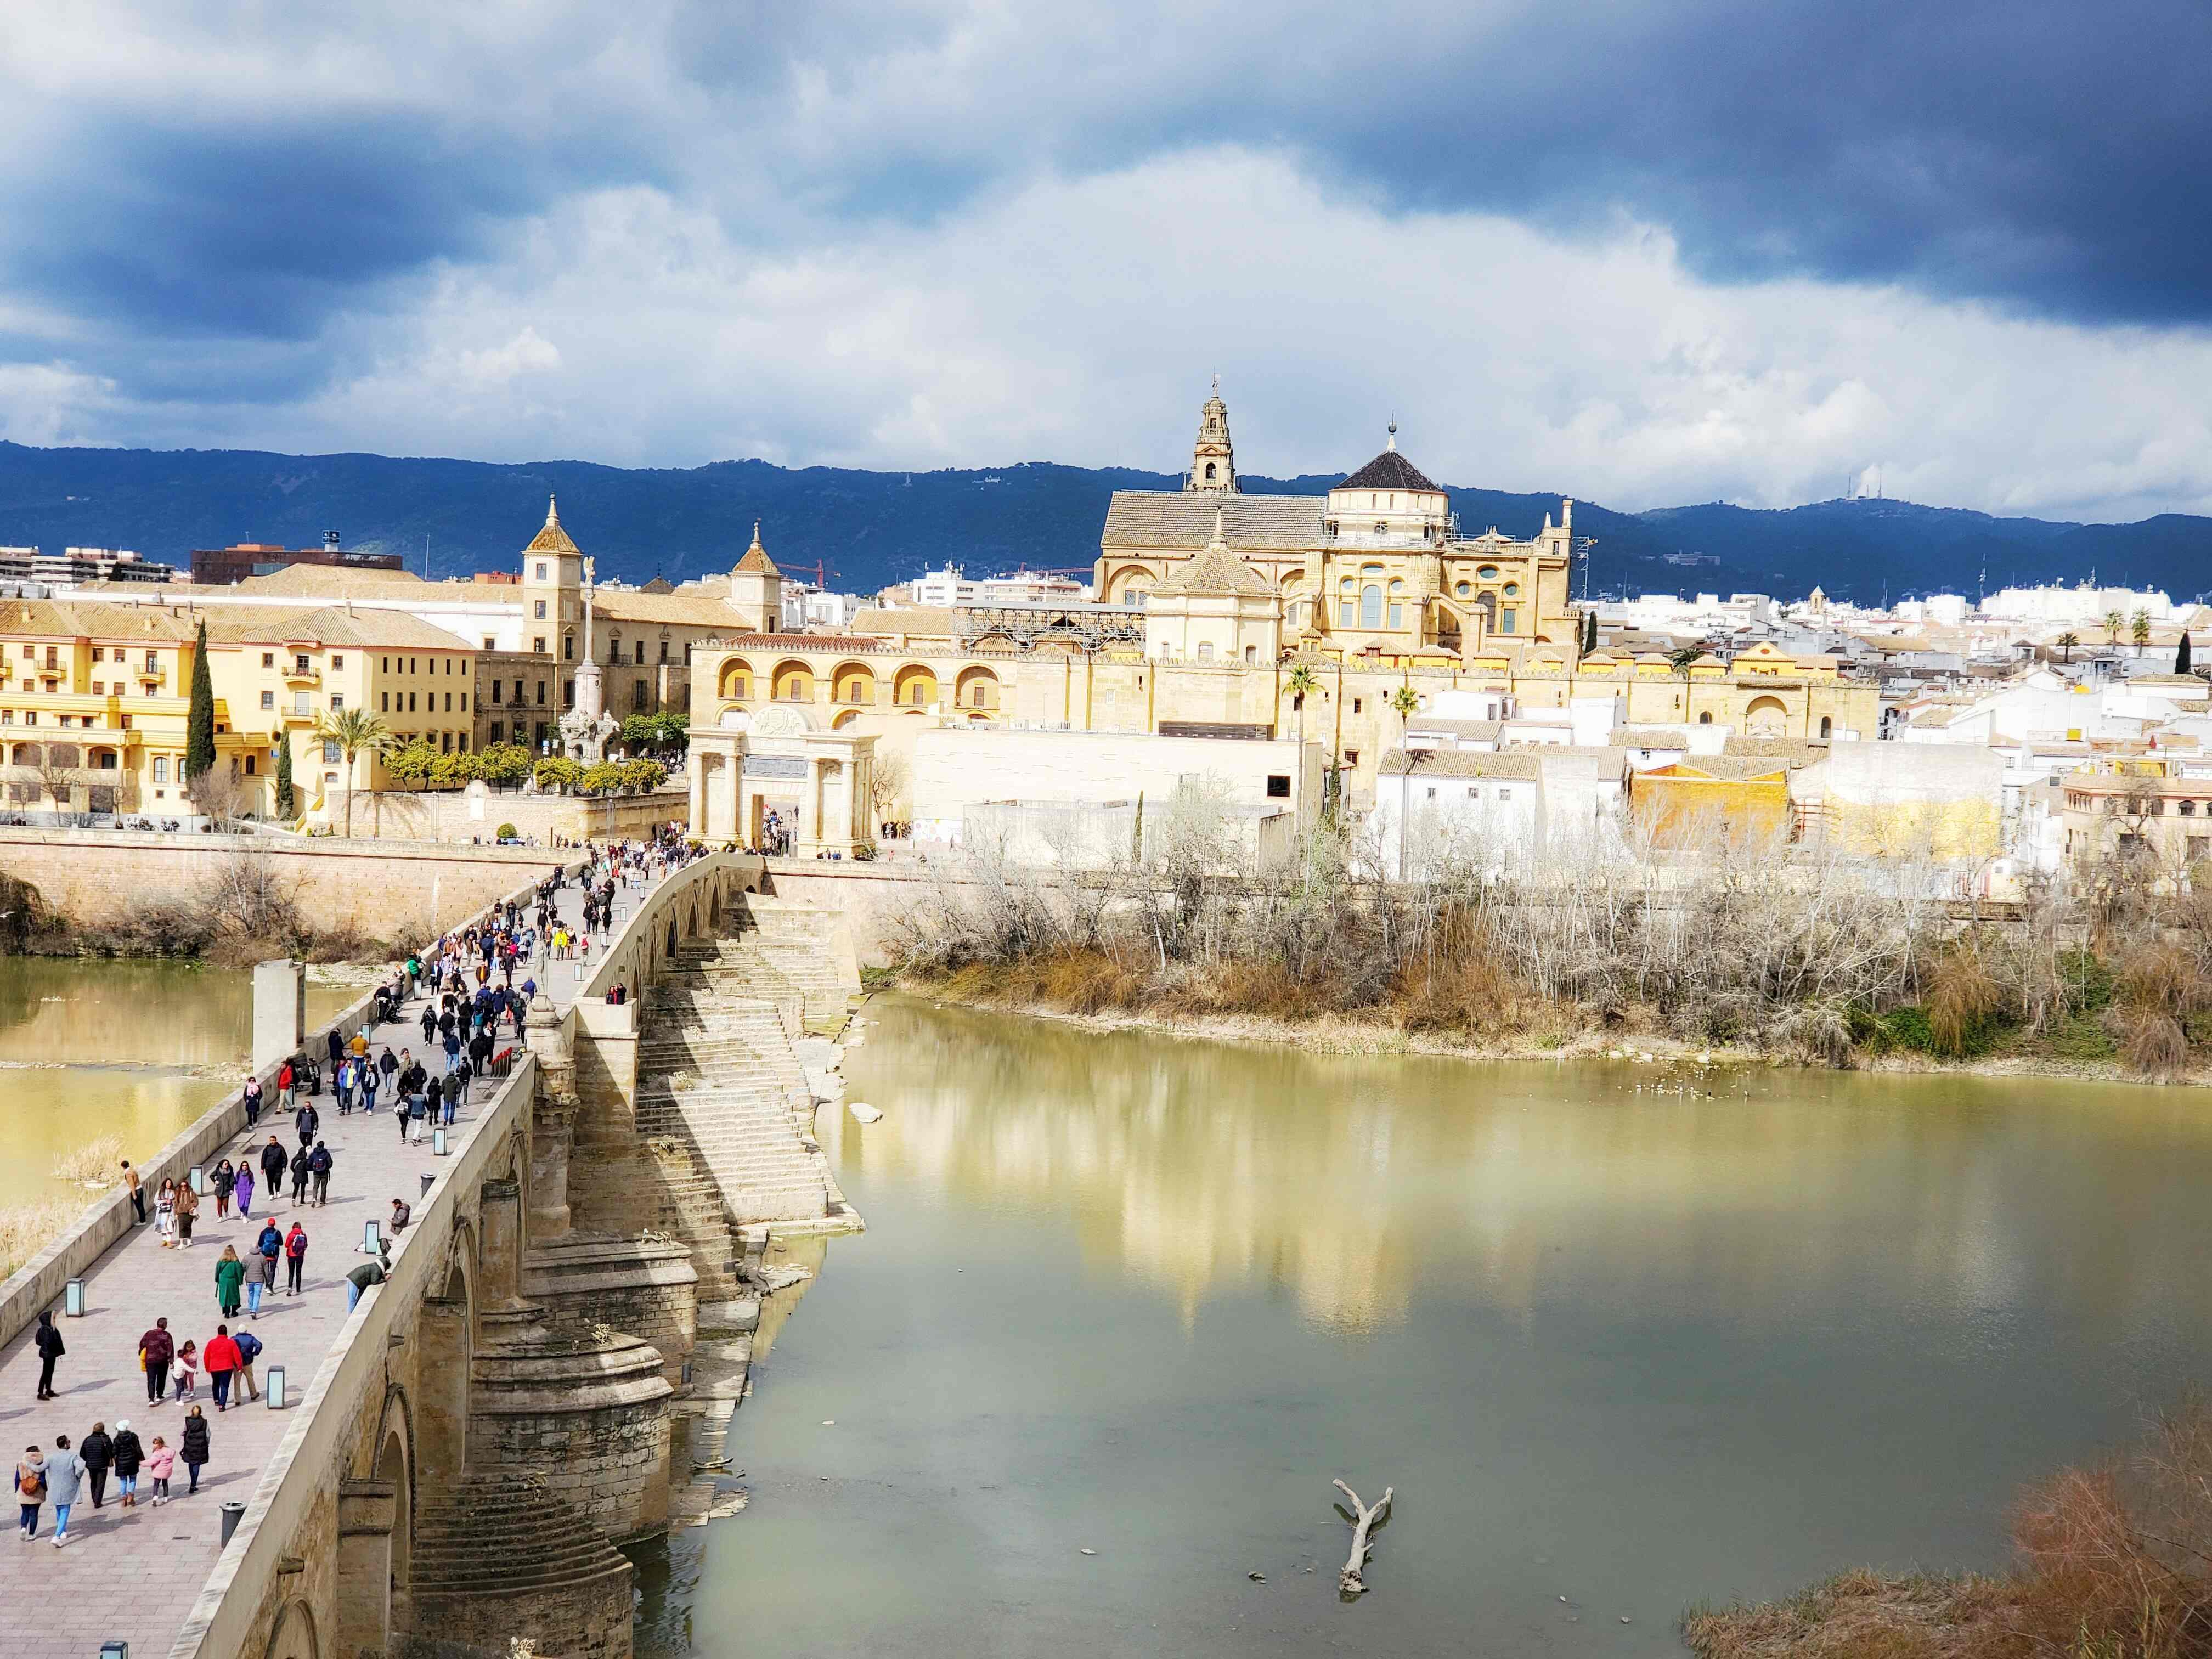 view from above Cordoba's roman bridge, river, mezquita in distance, grey clouds